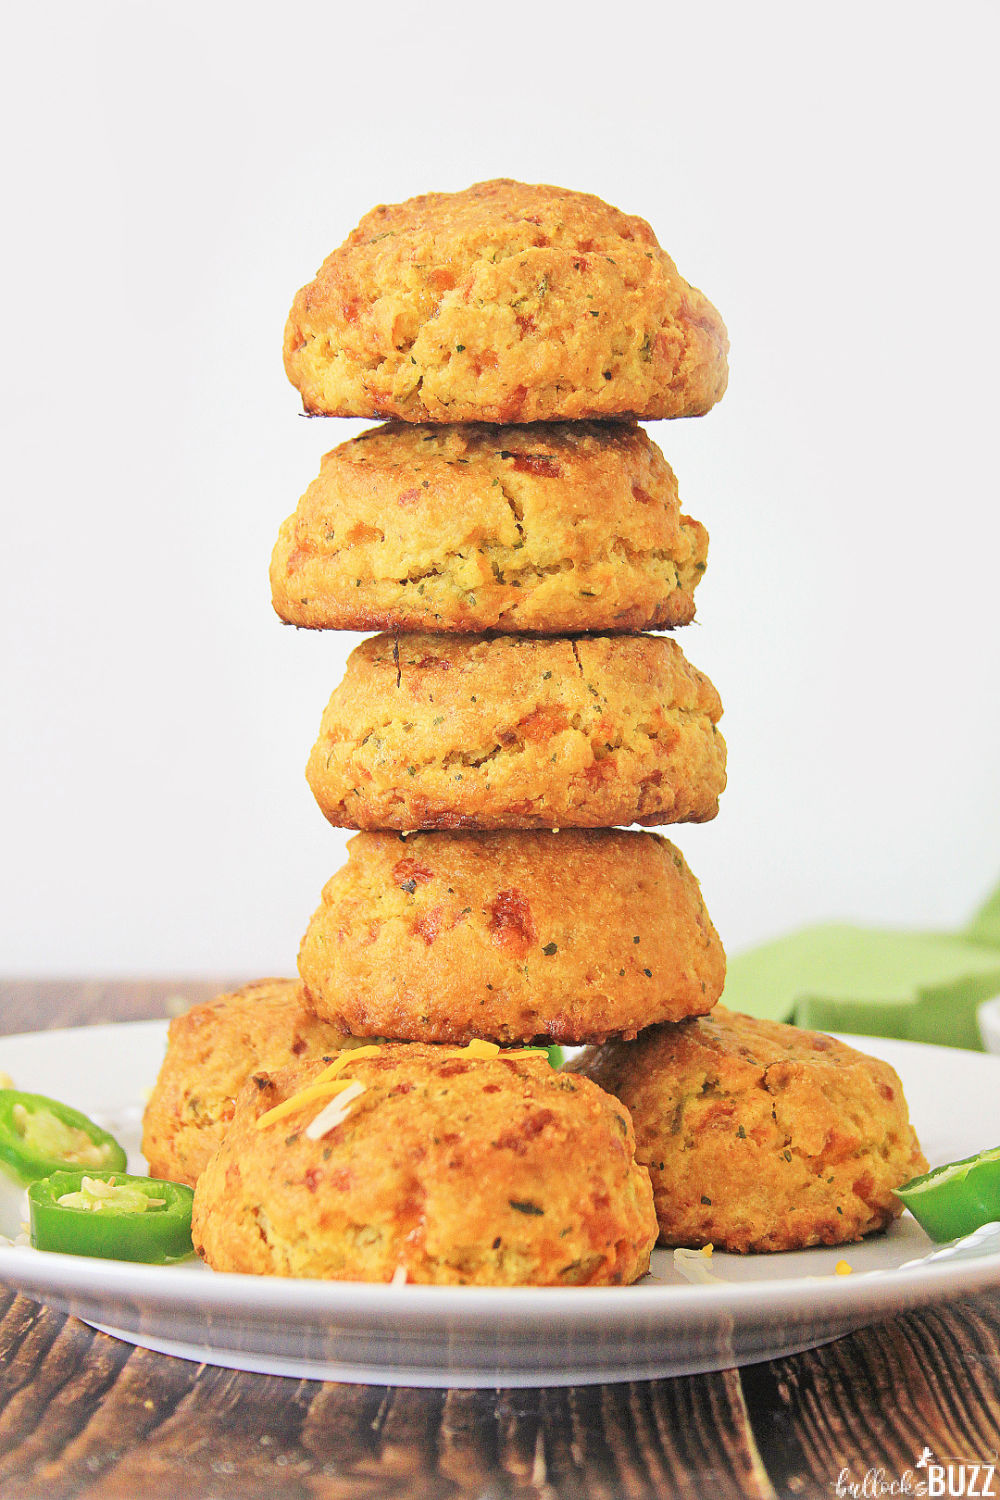 These sweet, crumbly Jalapeño Cheddar Cornbread Muffins are unbelievably easy to make and incredibly delicious.